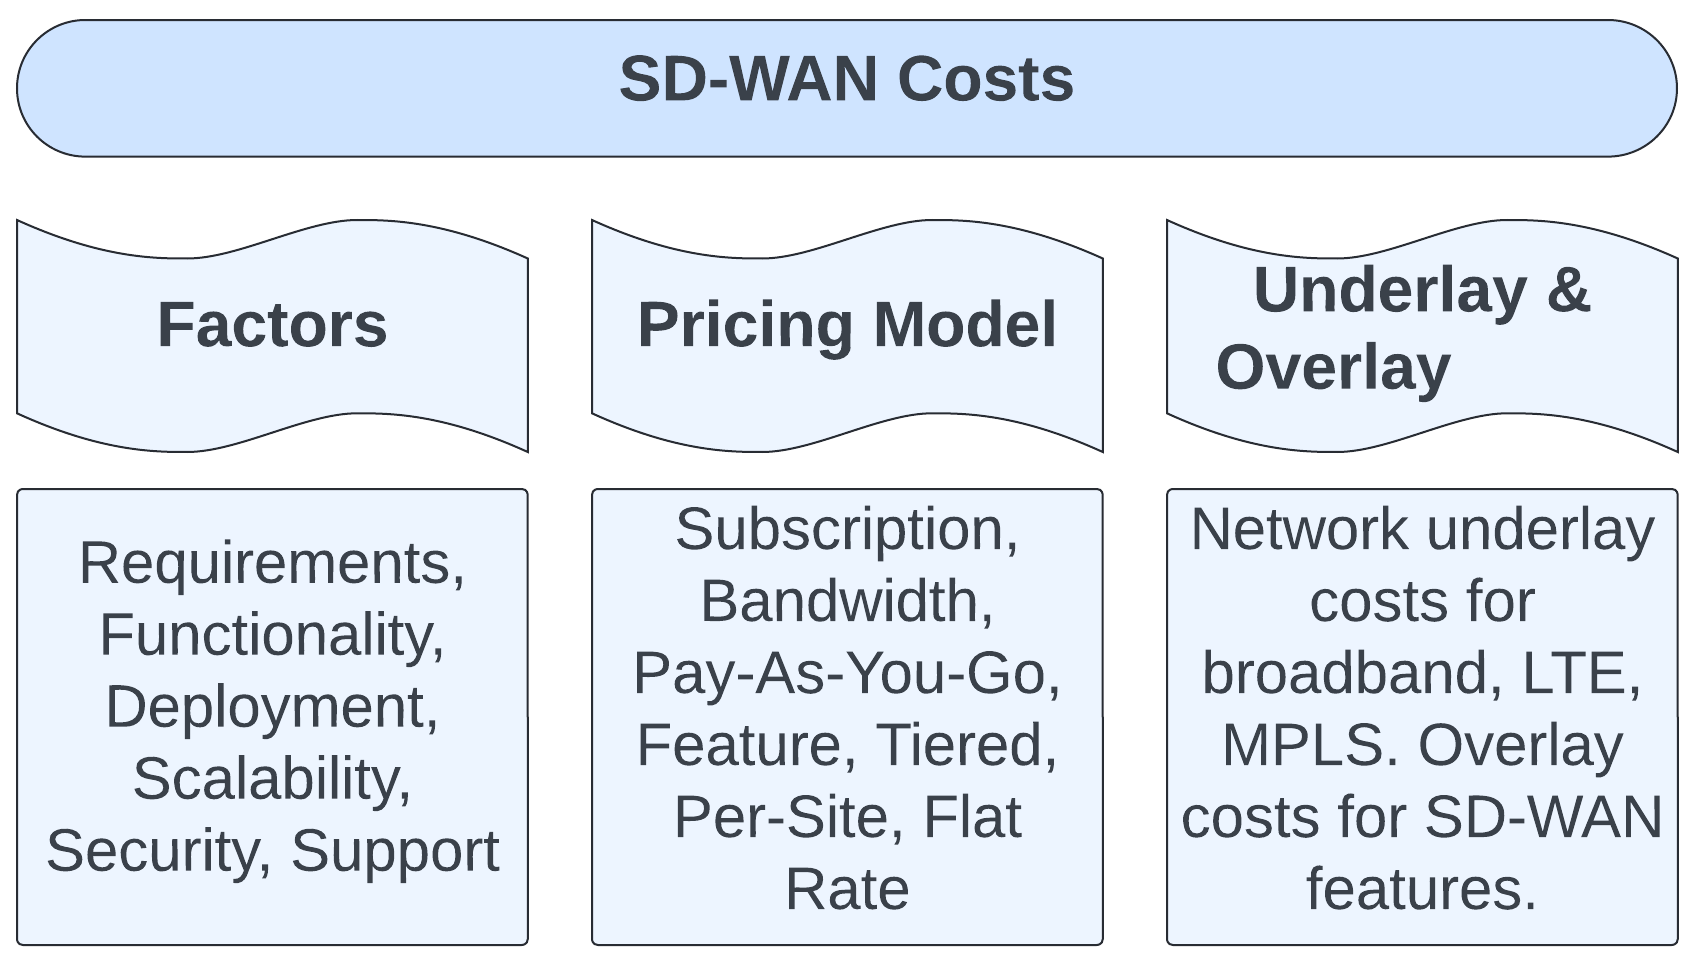 Get quotes to find out how much SD-WAN costs